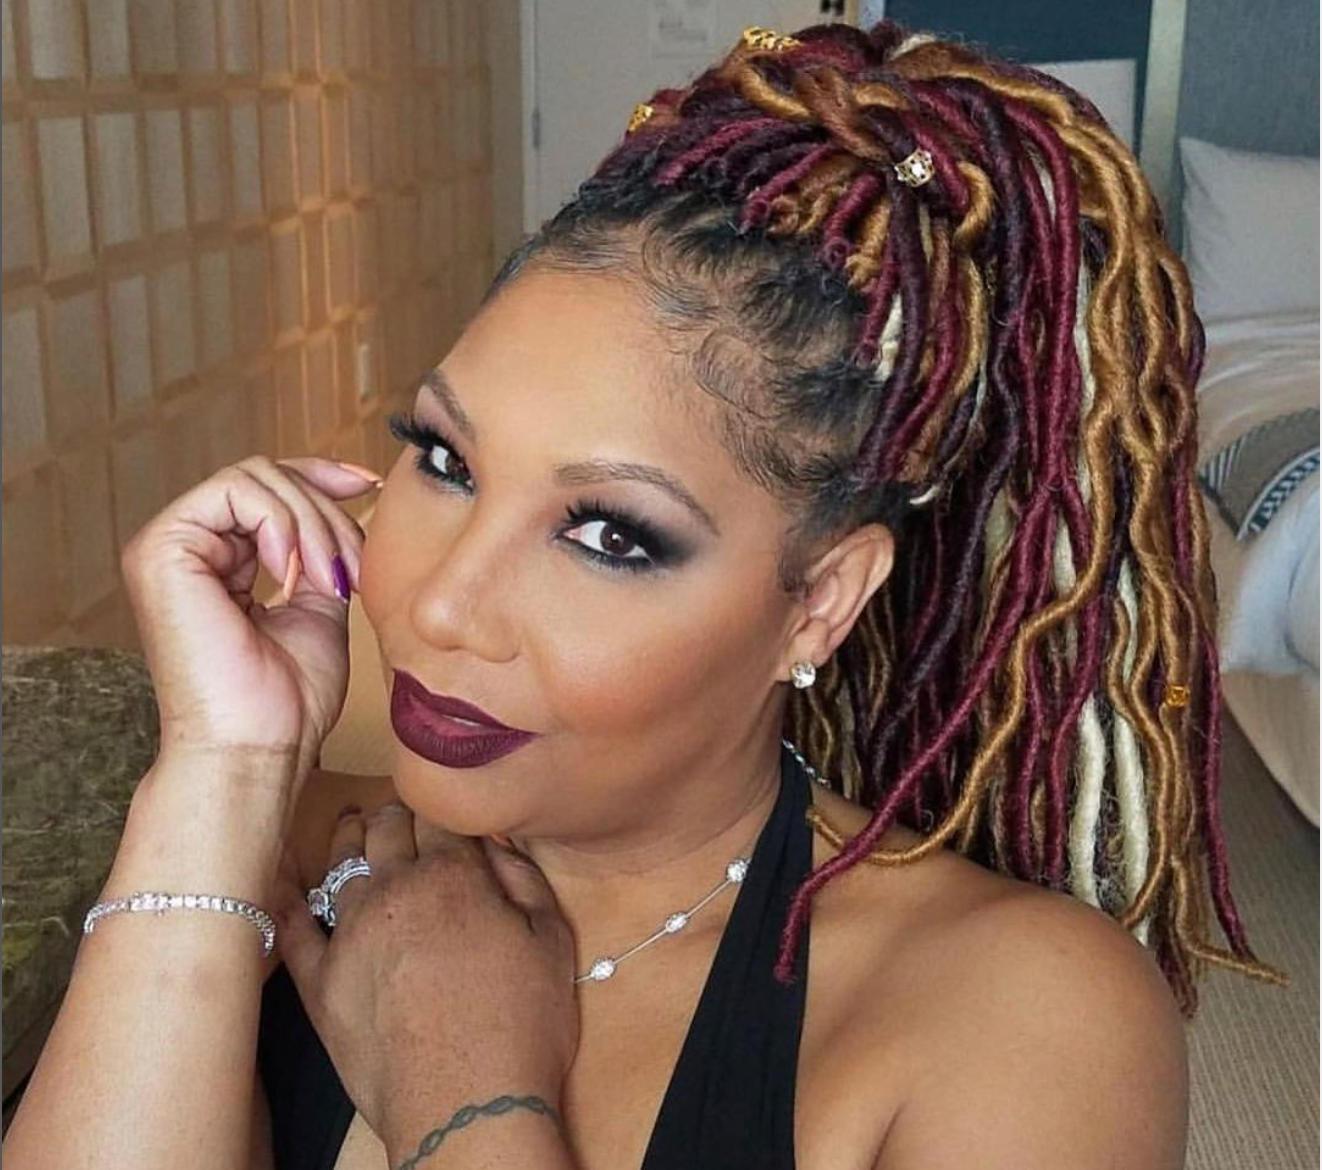 Traci Braxton Passes Away At 50 After Private Battle With Cancer